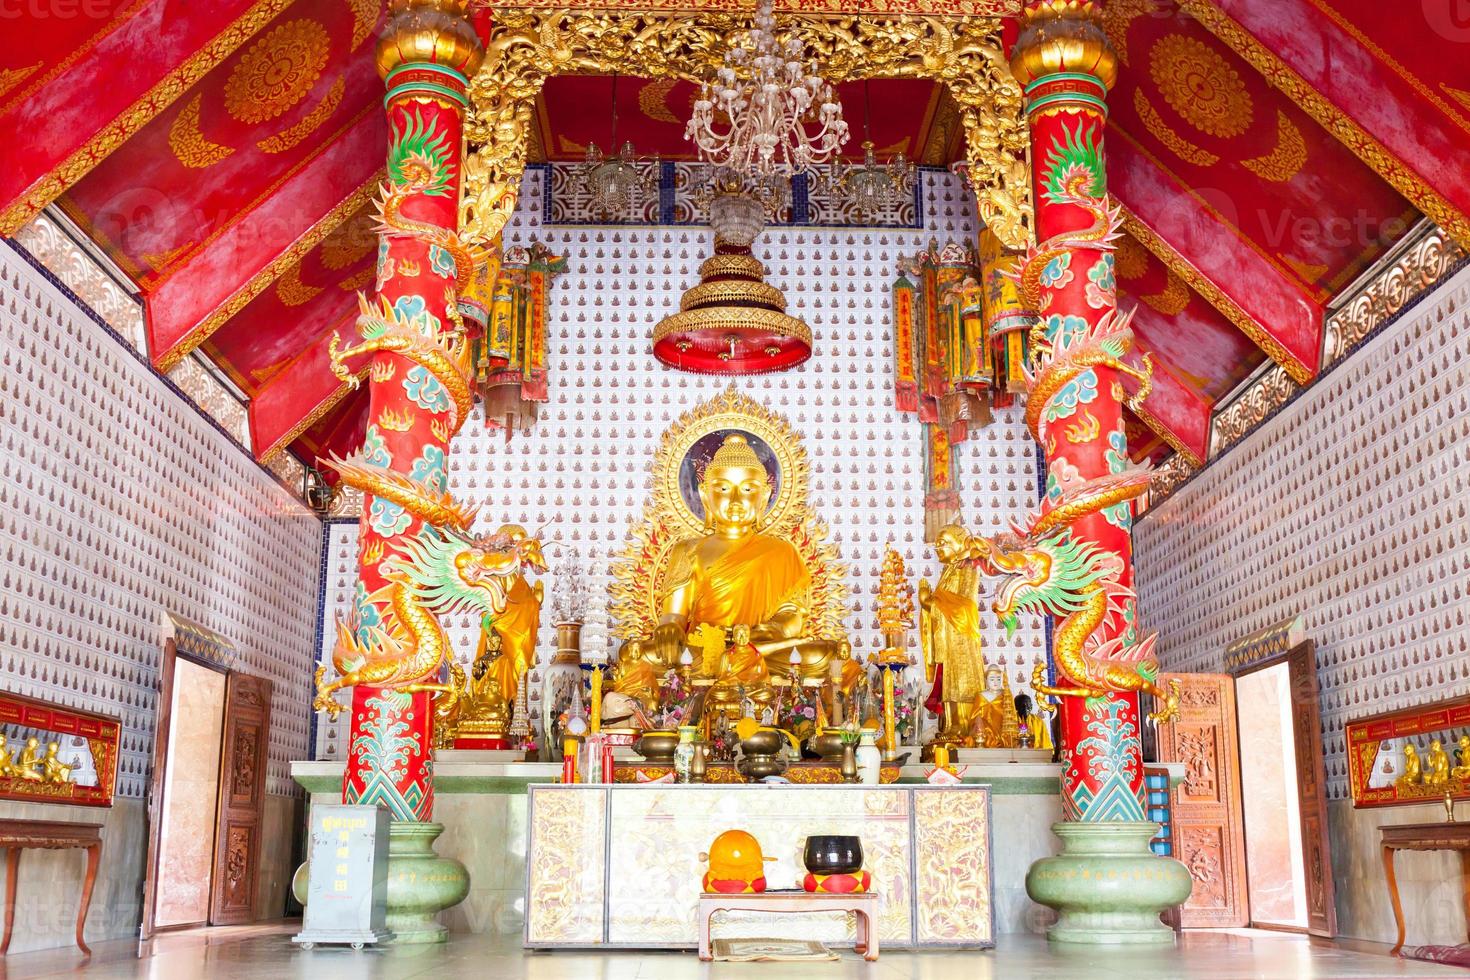 Golden buddha statue in Chinese temple photo